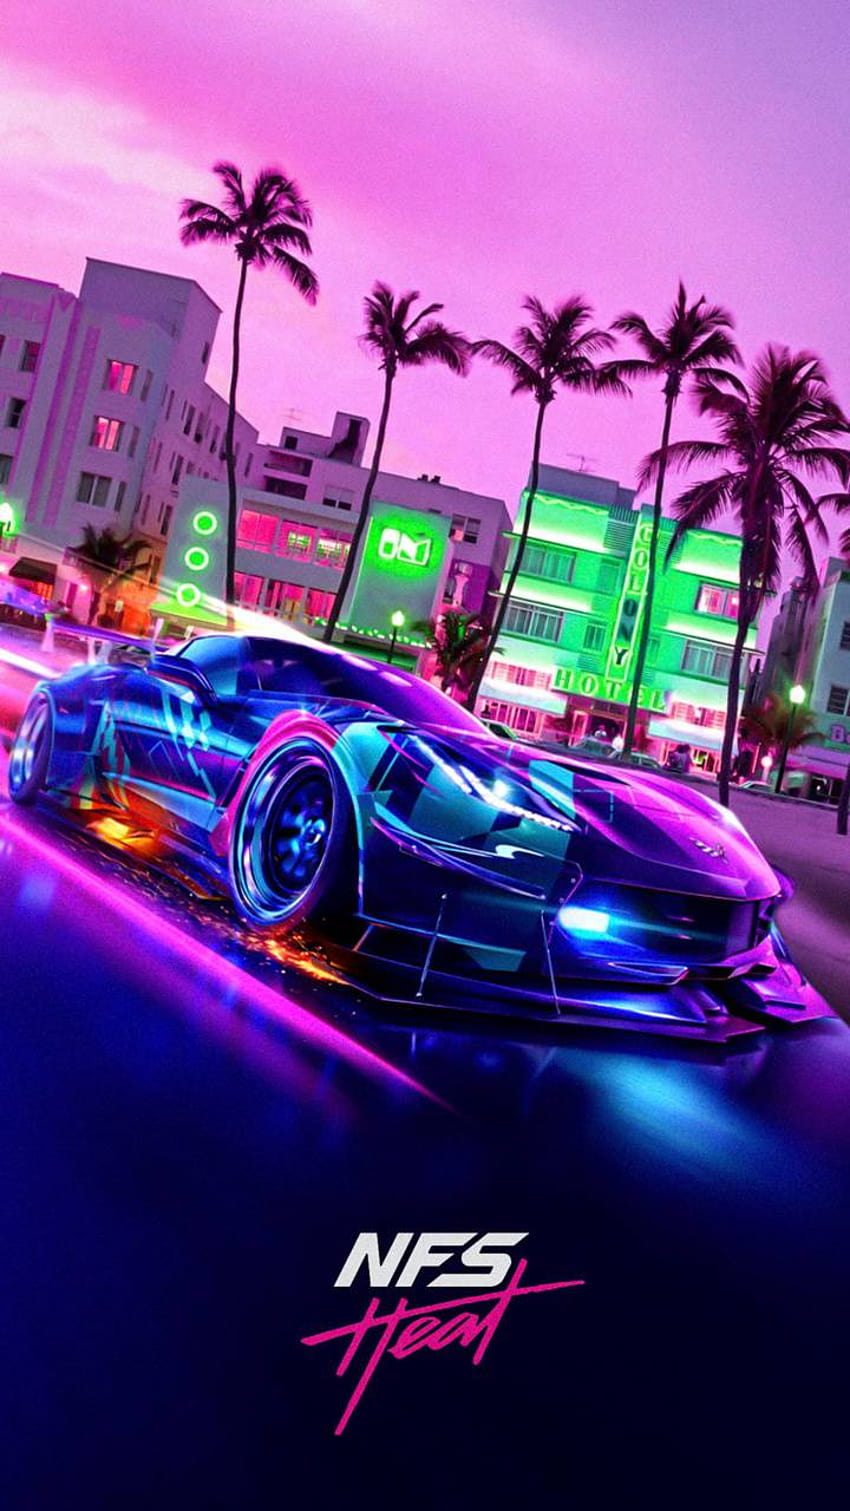 Need for speed heat by MartGee, nfs heat iphone HD phone wallpaper